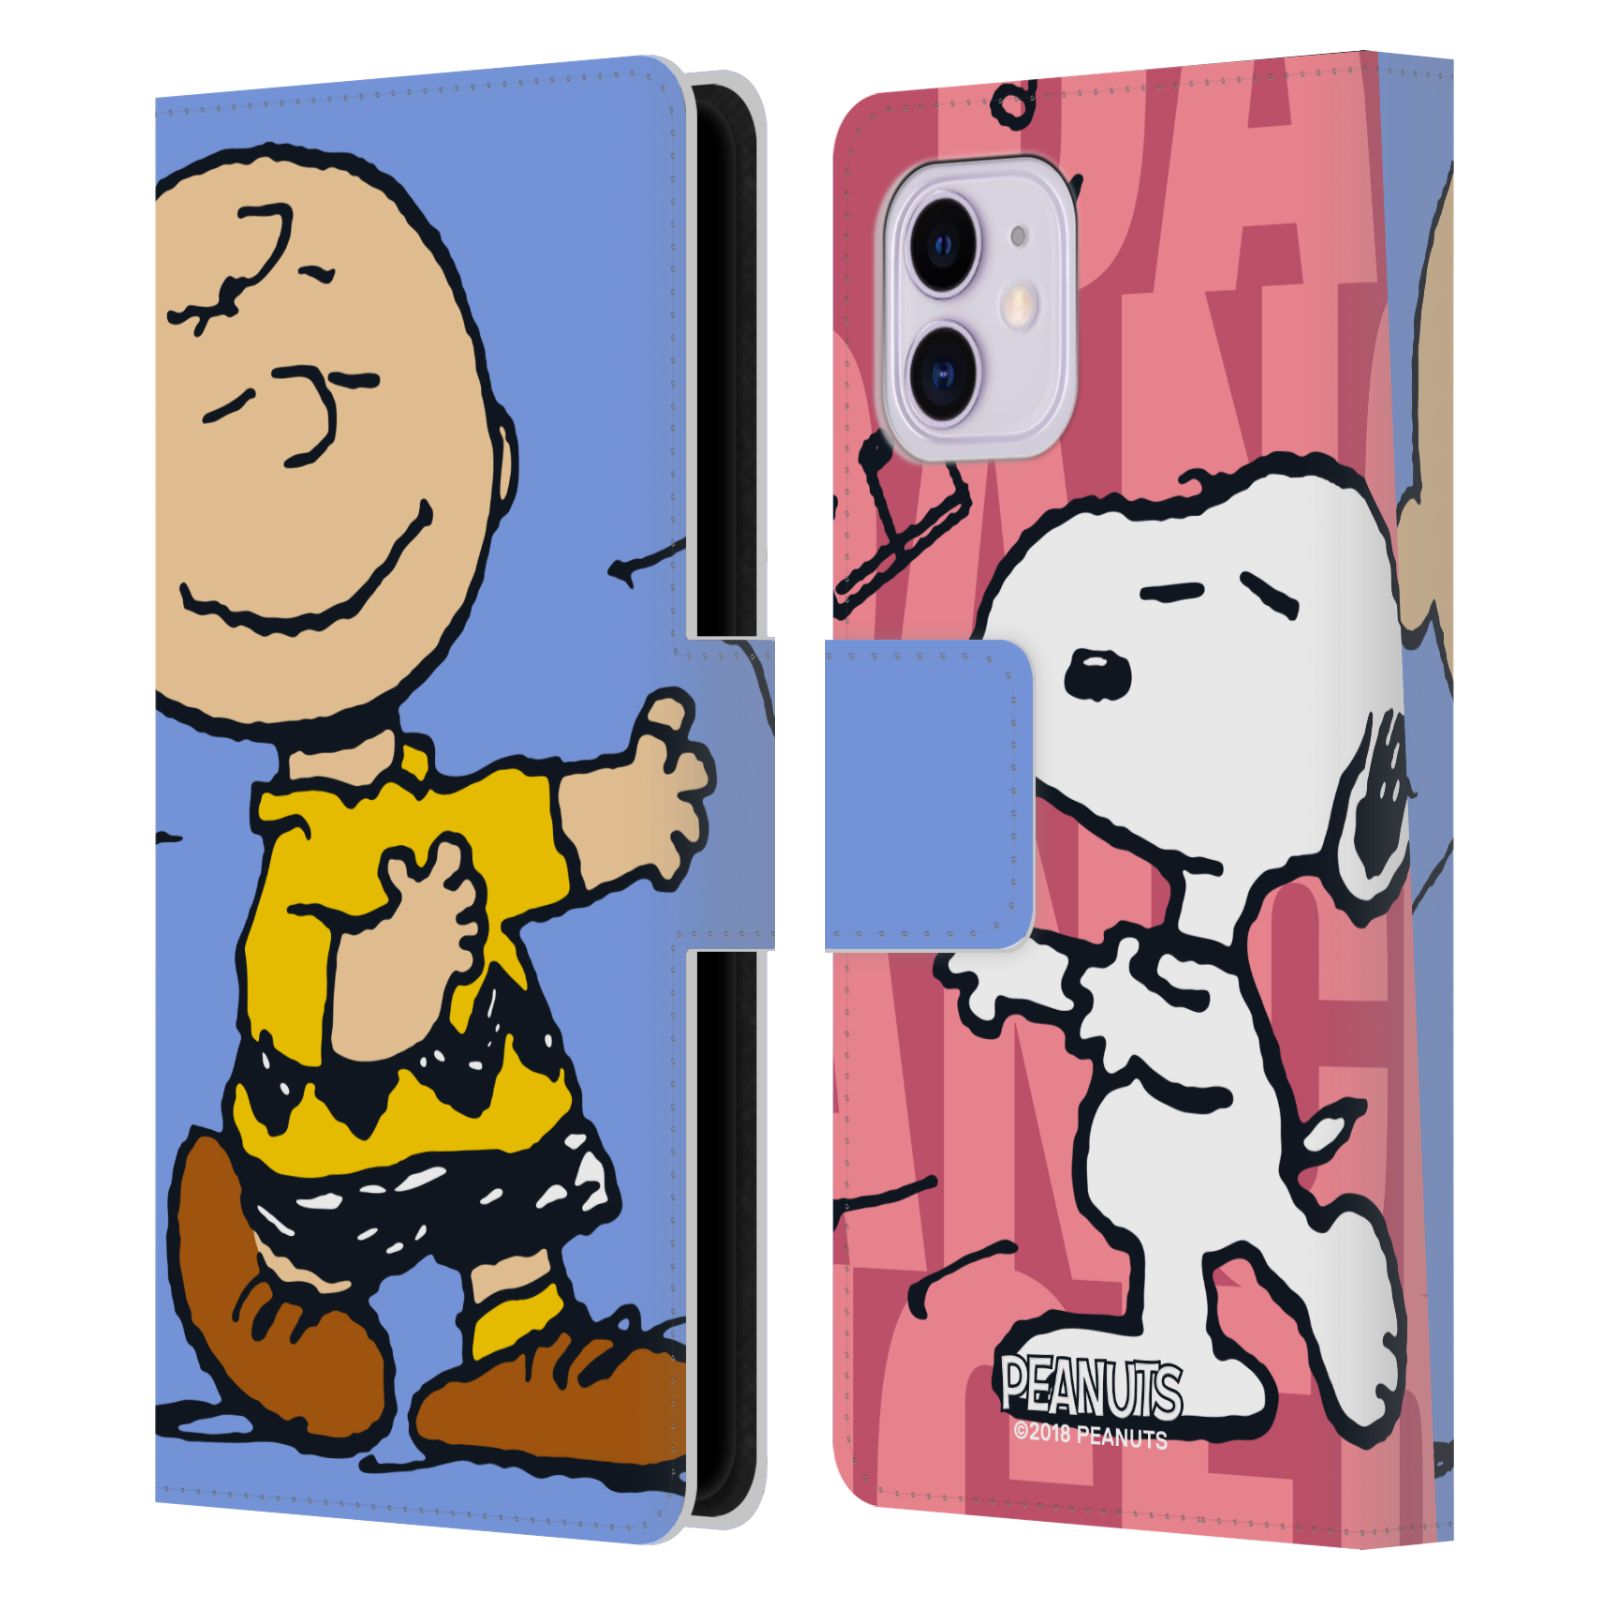 Pouzdro na mobil Apple Iphone 11 - Head Case - Peanuts - Snoopy a Charlie